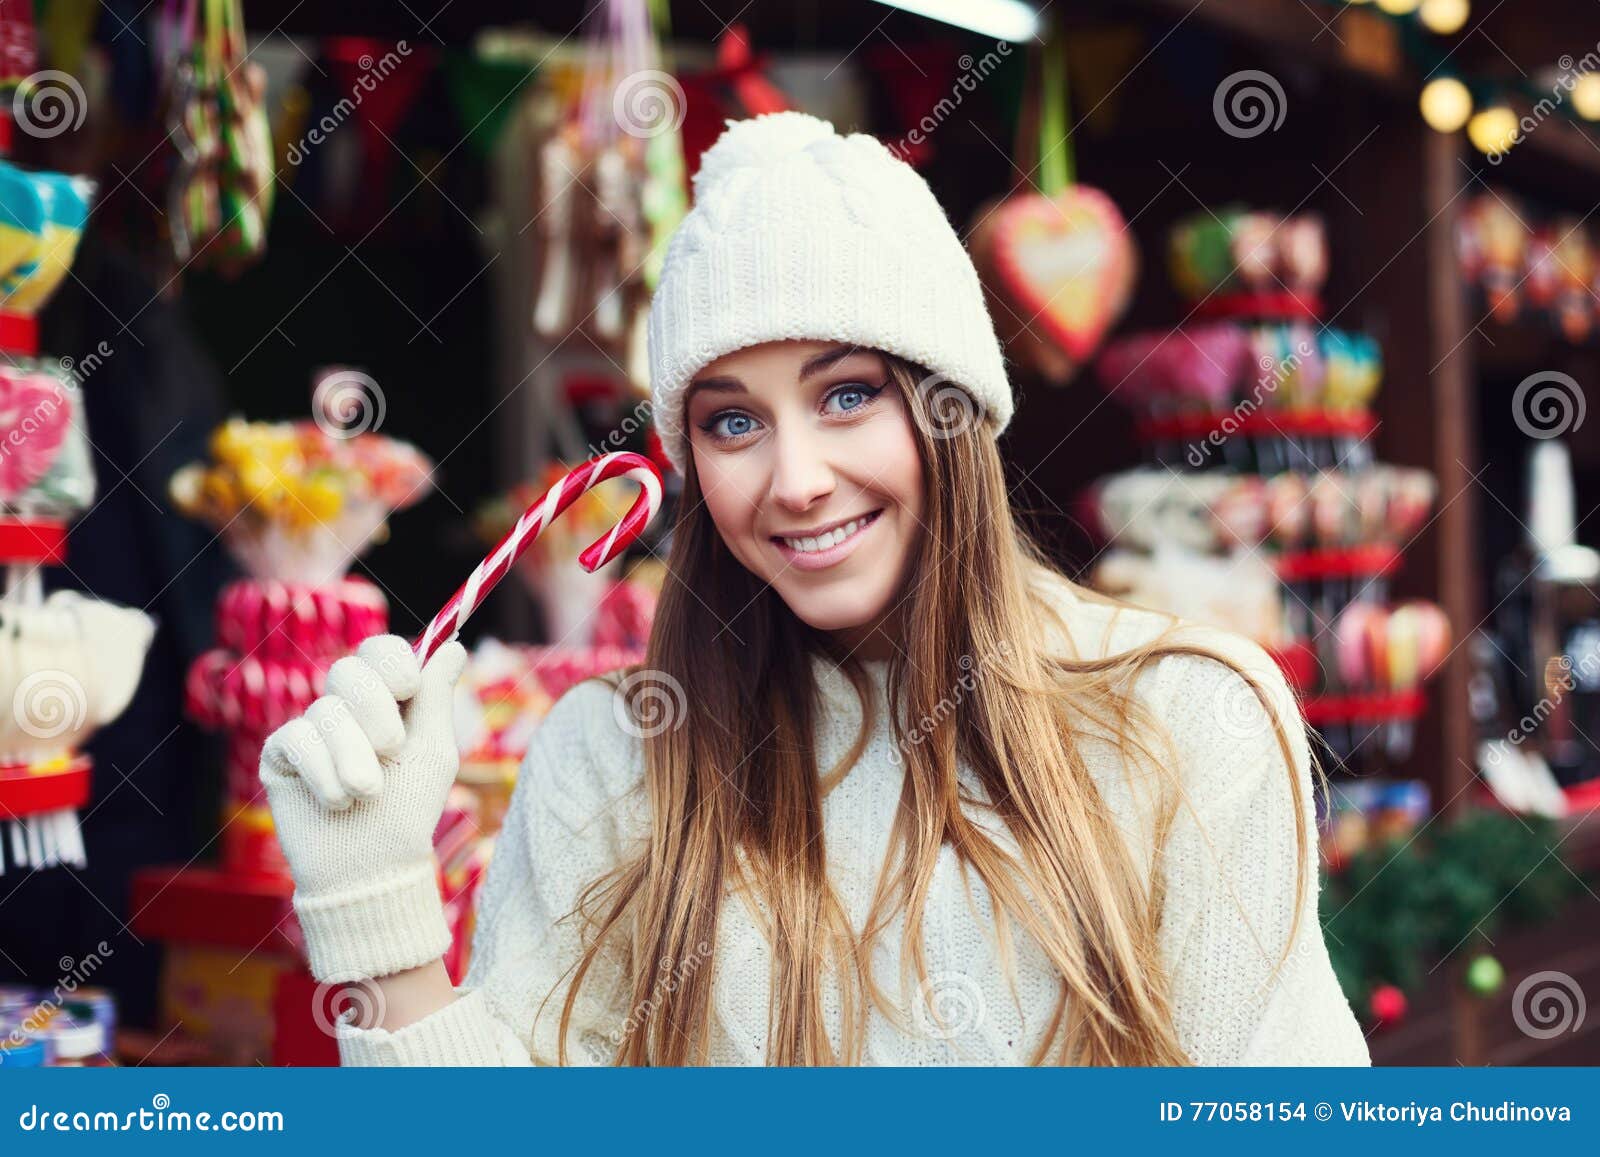 Street Fashion Portrait of Smiling Beautiful Young Woman Holding Candy ...